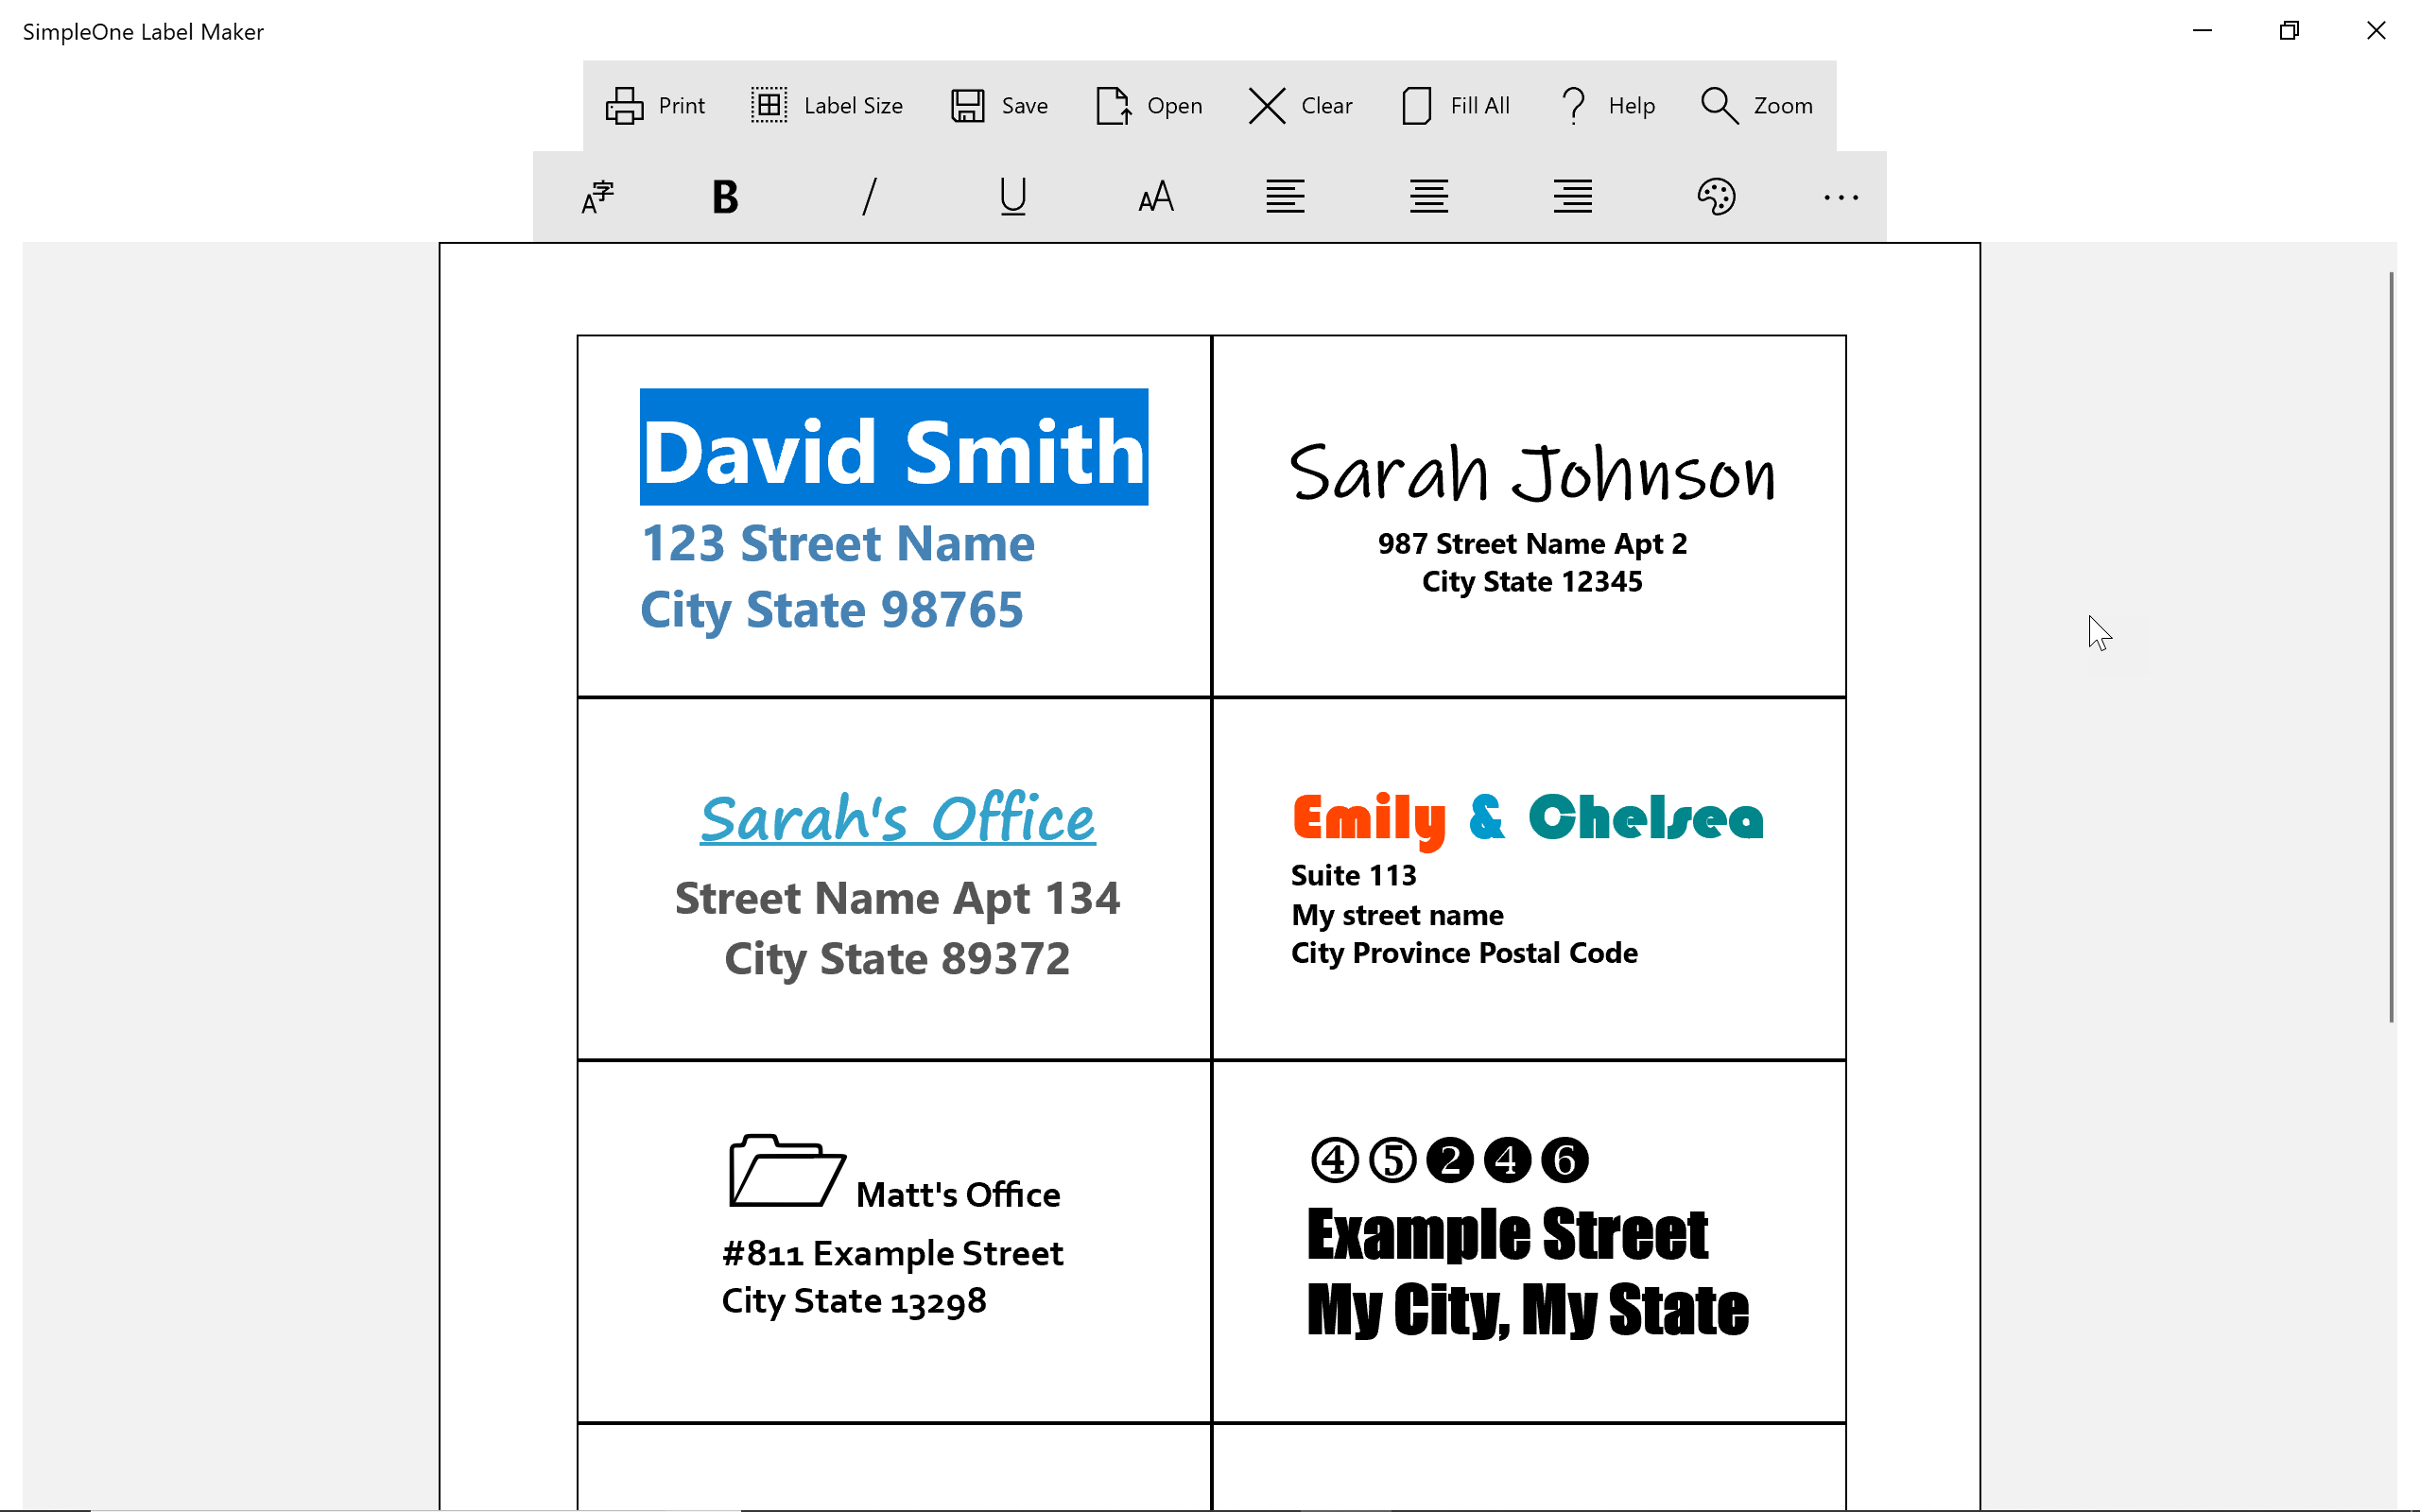 SimpleOne Label Maker - Windows 10 app for designing and printing labels